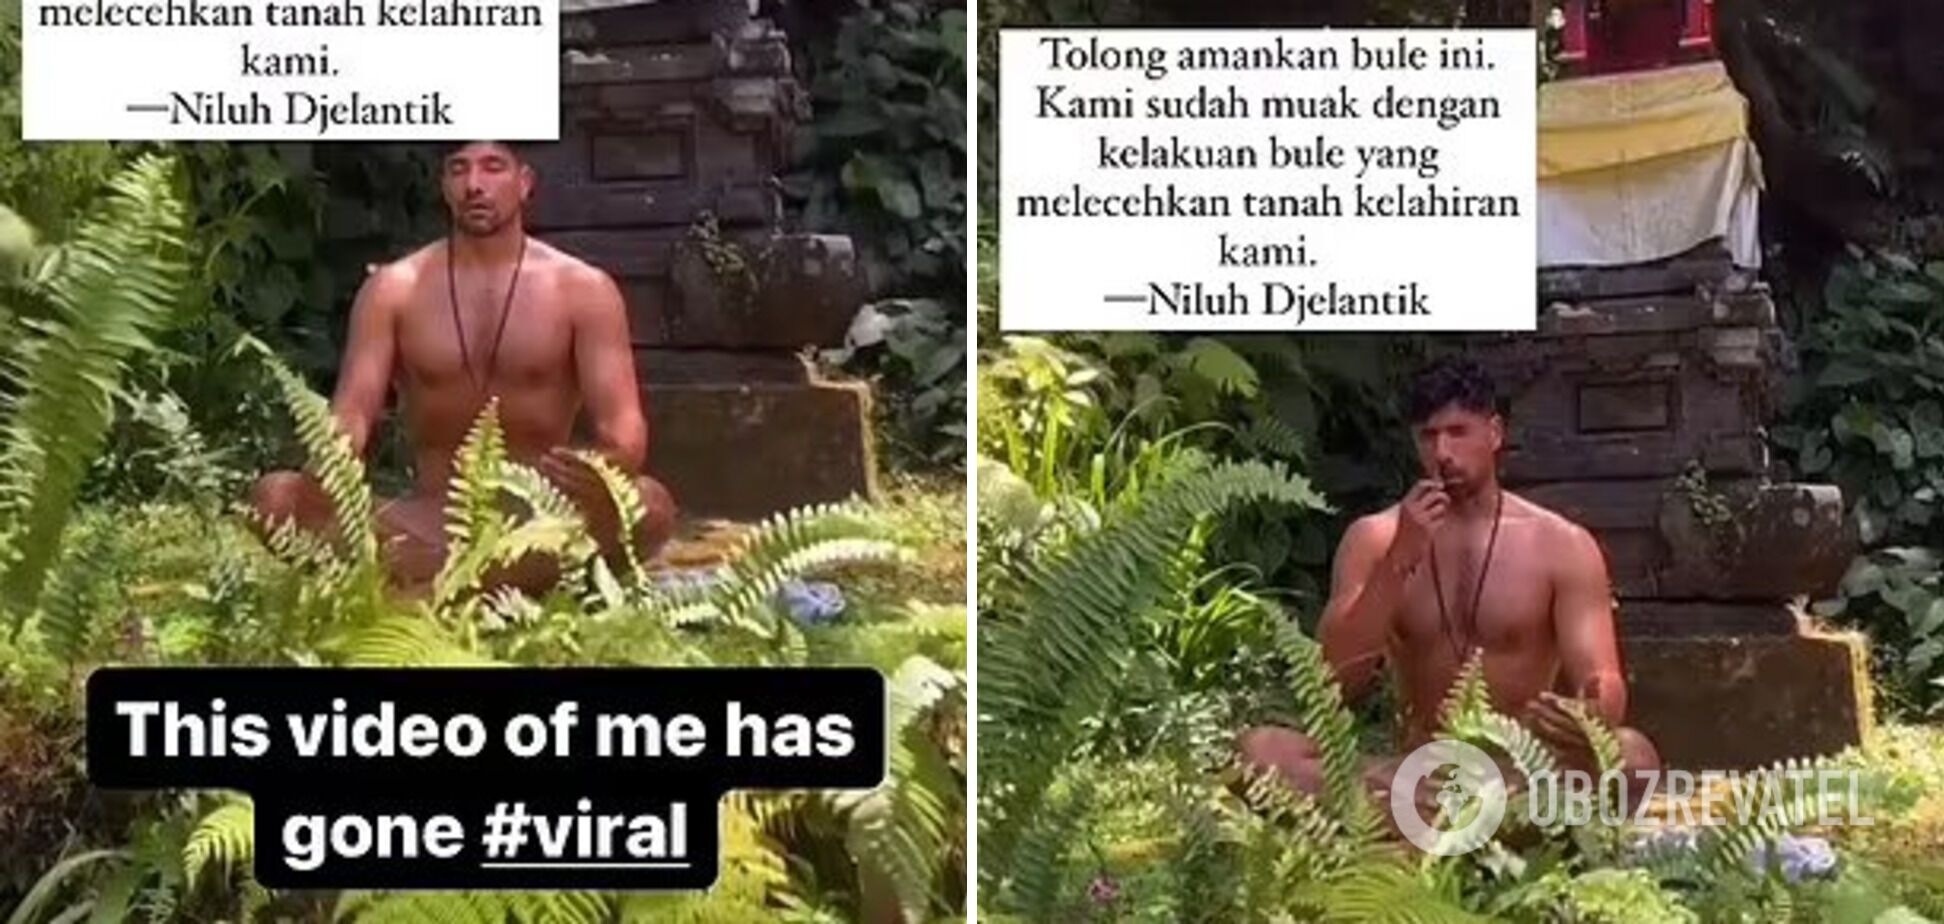 A tourist who meditated naked in a Hindu temple caused a stir in Bali. The video went viral